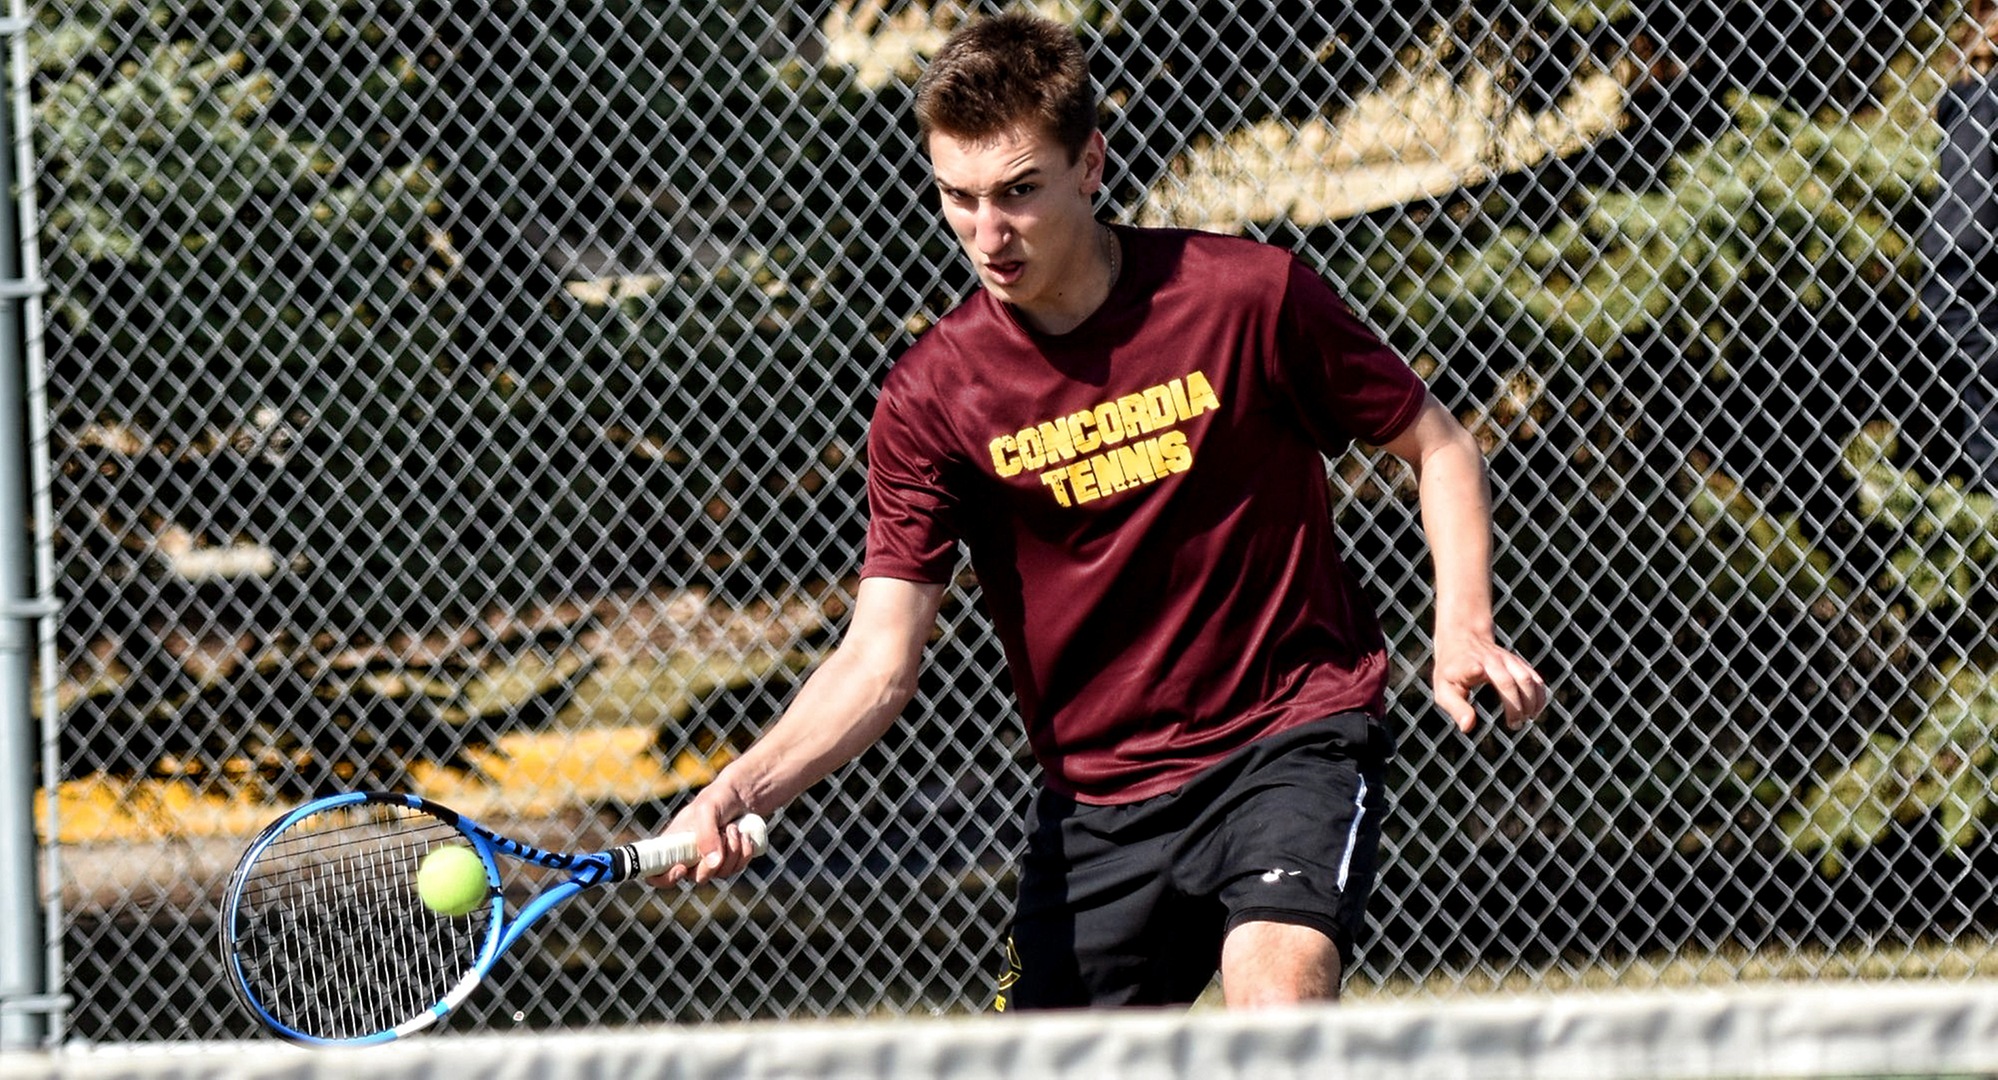 Sophomore Carter Steffes gets ready for a volley at the net during his 6-2, 7-6 (10) win at No.5 singles in the Cobbers' match with Martin Luther.